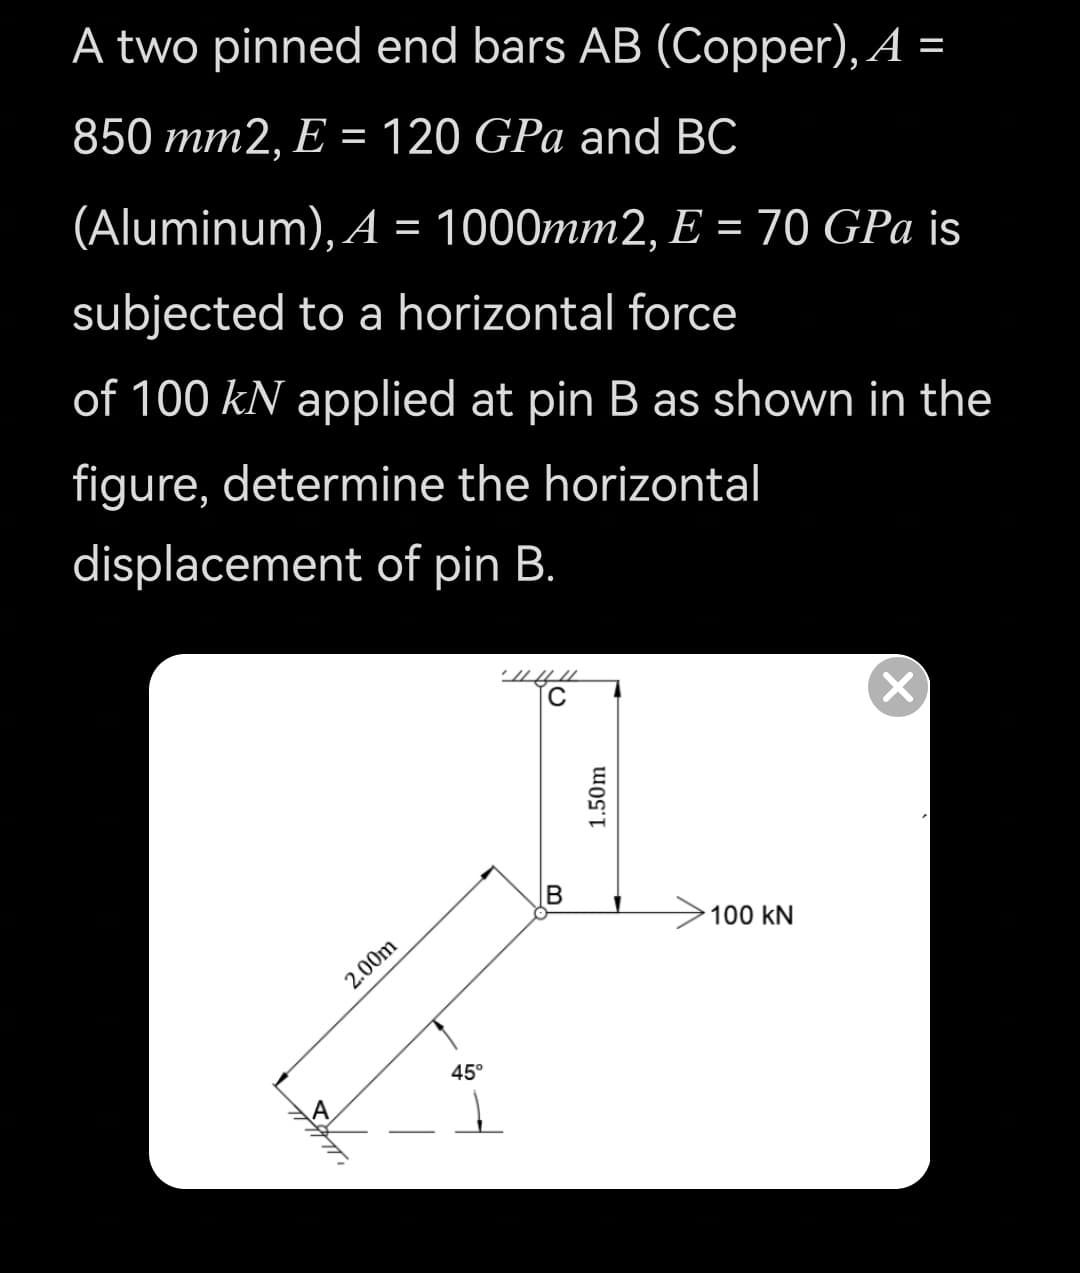 A two pinned end bars AB (Copper), A =
850 mm2, E = 120 GPa and BC
(Aluminum), A = 1000mm2, E = 70 GPa is
subjected to a horizontal force
of 100 kN applied at pin B as shown in the
figure, determine the horizontal
displacement of pin B.
C
B
100 kN
2.00m
45°
1.50m
